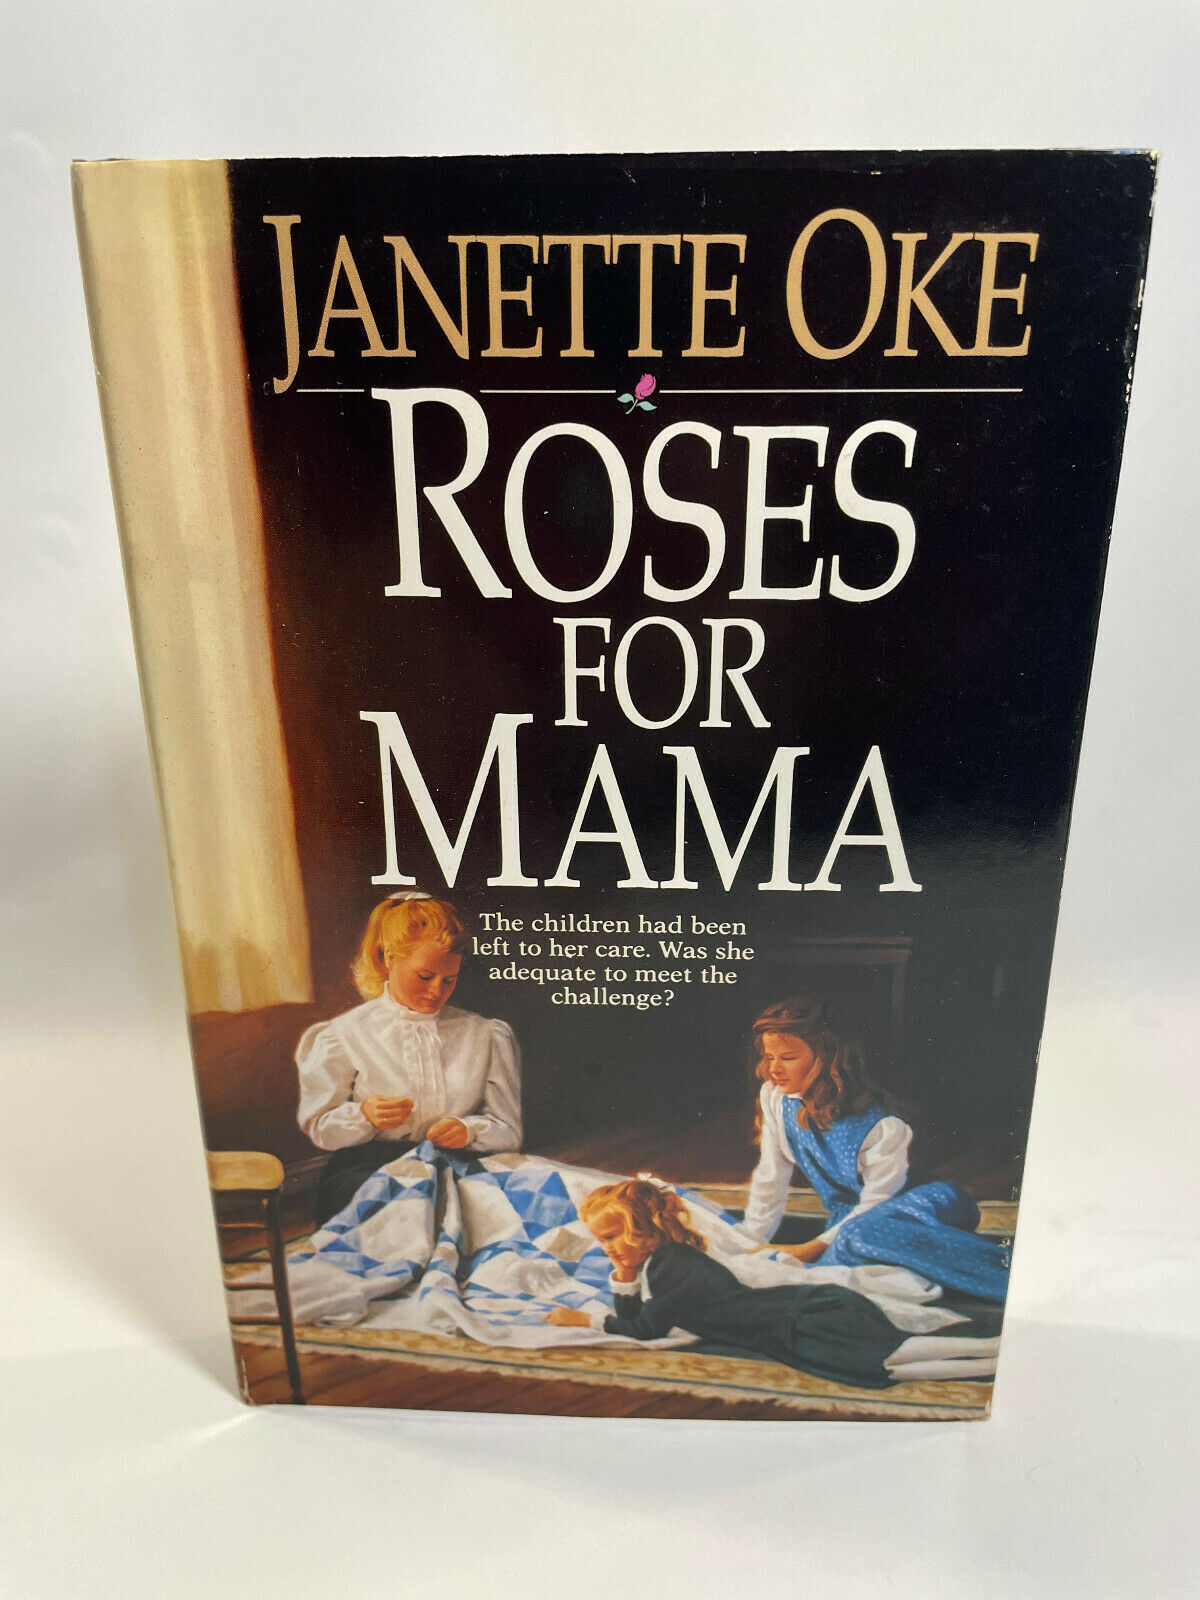 Women of the West Ser.: Roses for Mama by Janette Oke 1991 (A1)